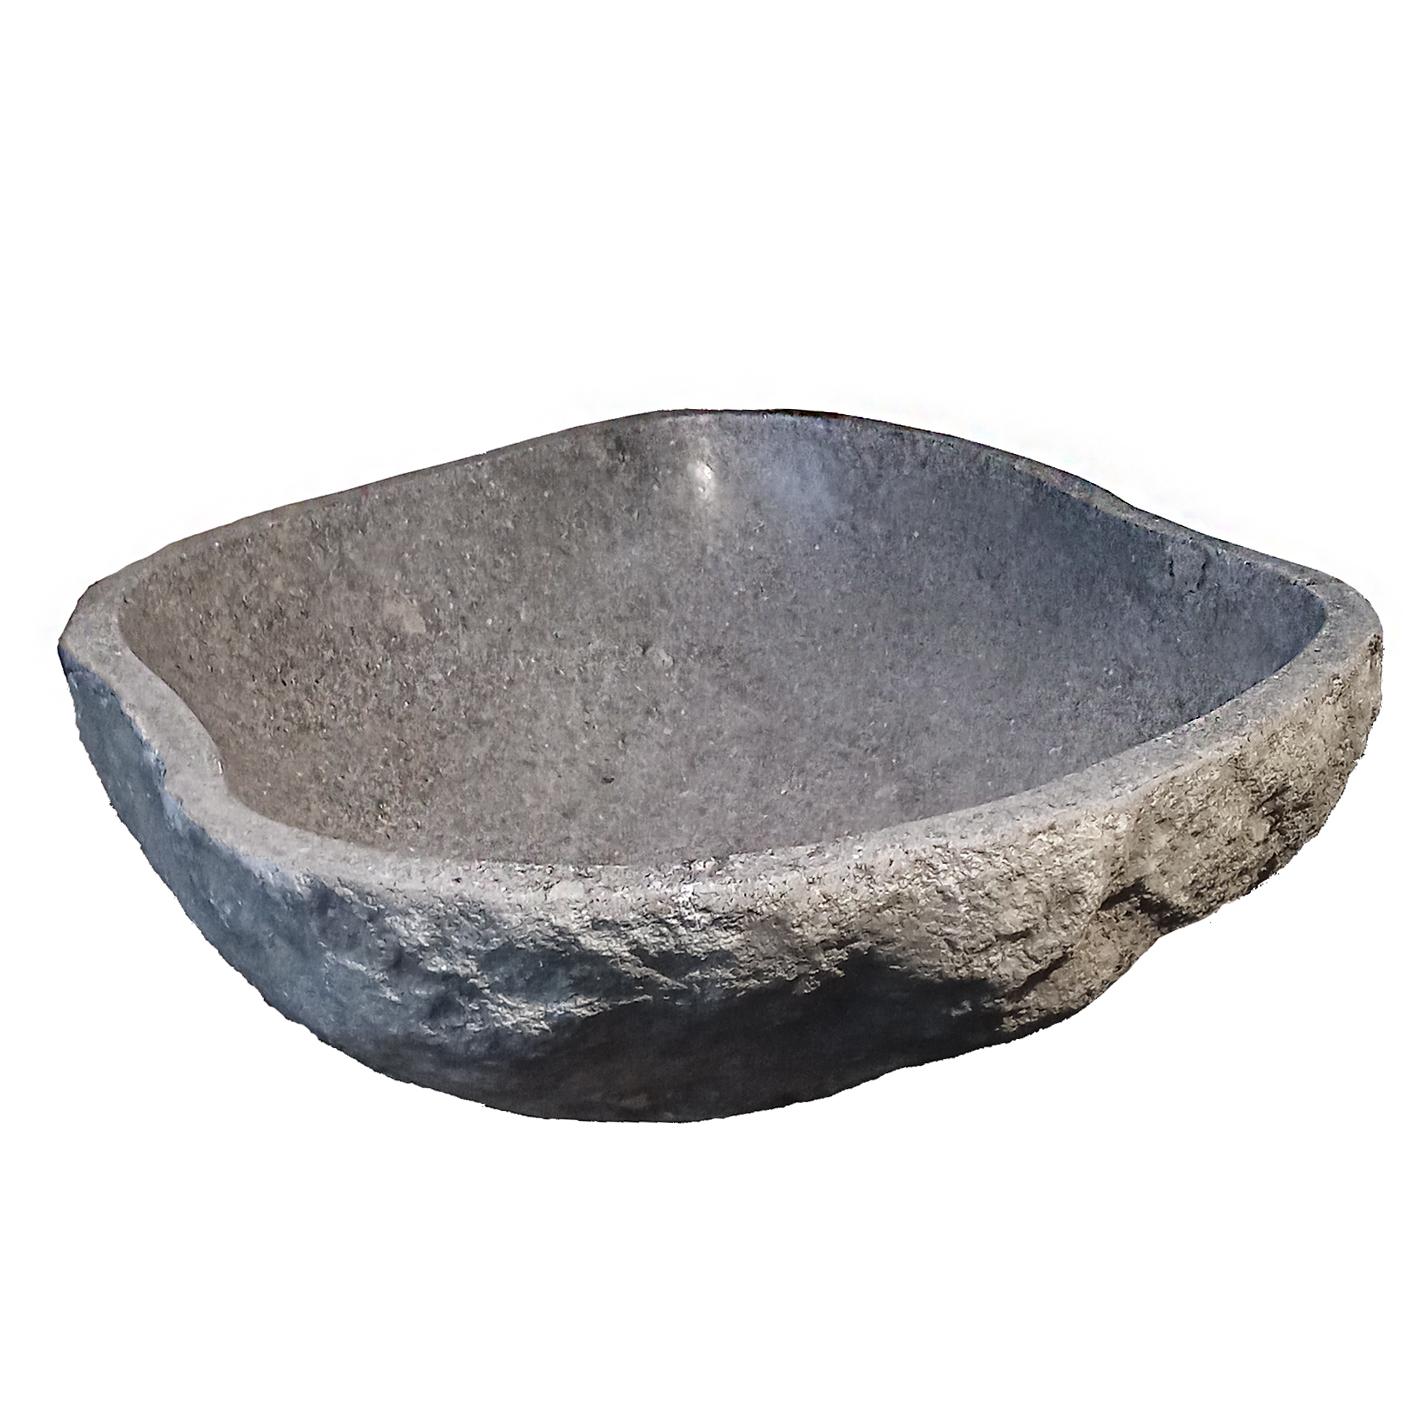 Organic Modern Stone Sink or Basin from Indonesia For Sale